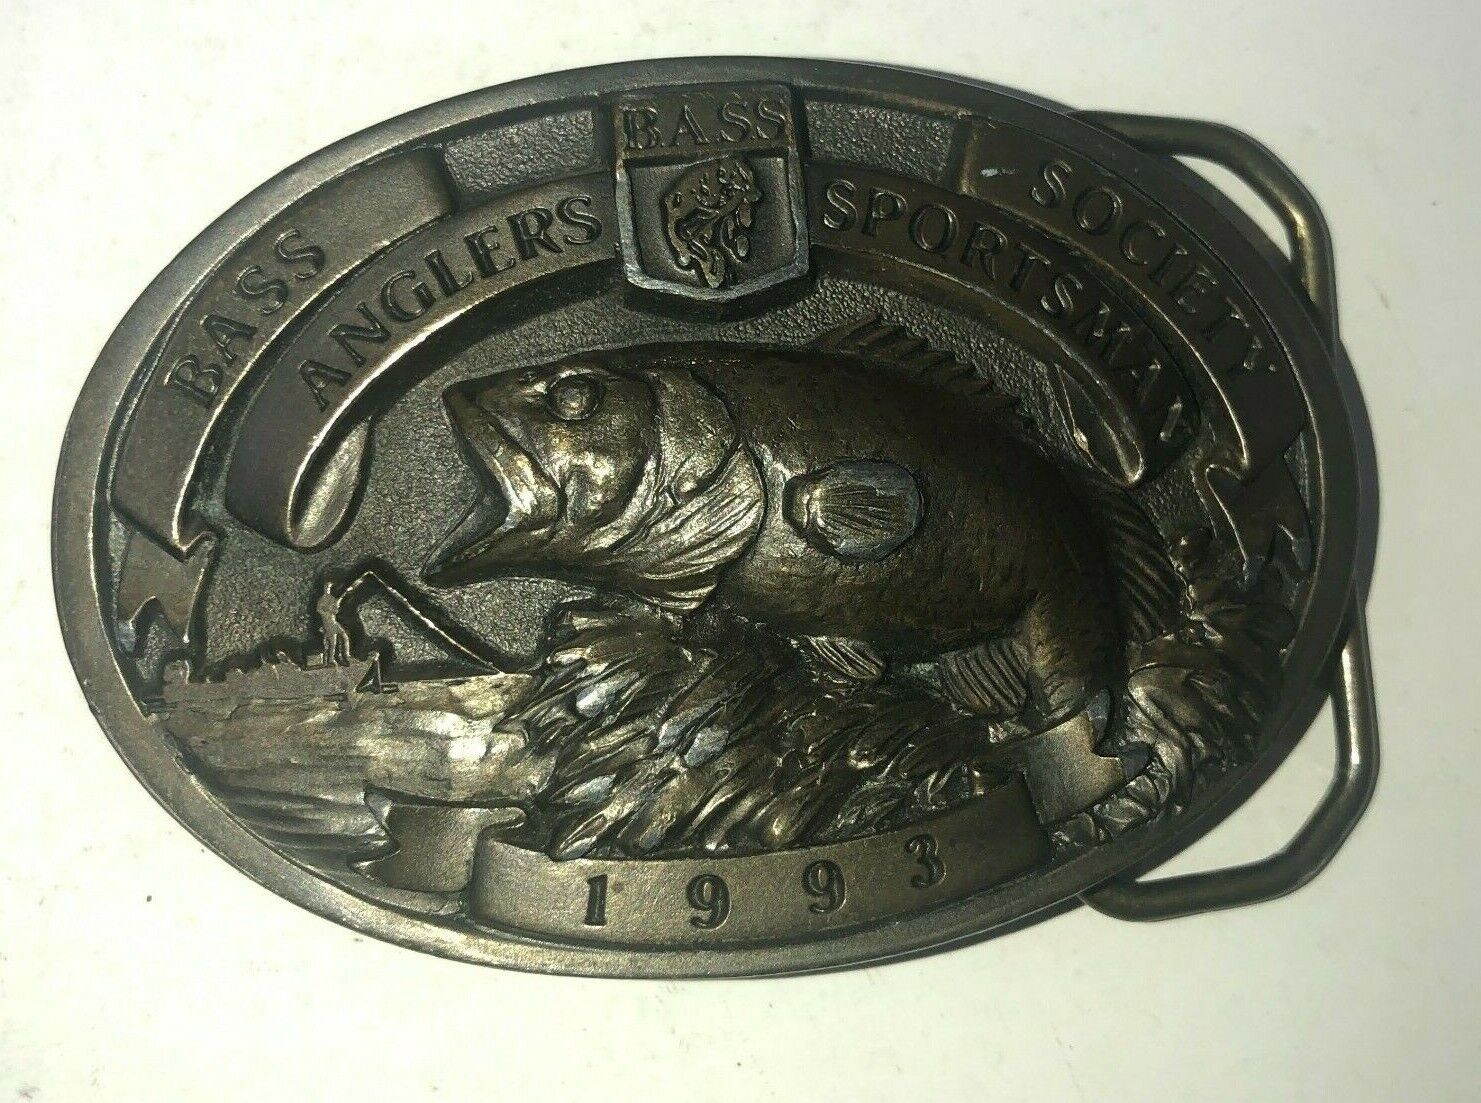 BASS Anglers Sportsman Society Belt Buckle - Dated 1993